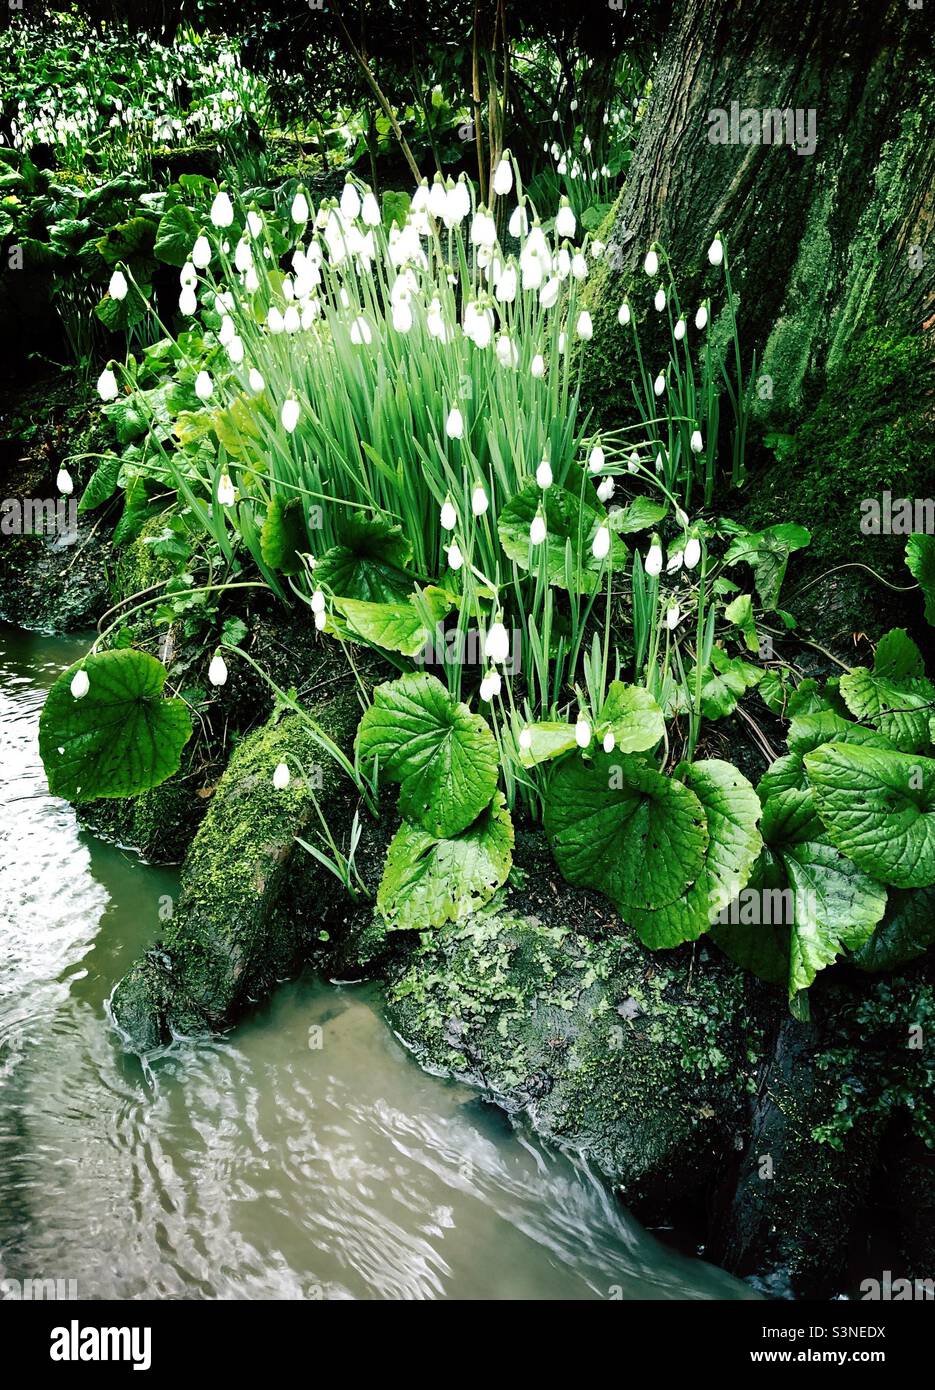 Snowdrops in flower by a garden stream in February, United Kingdom Stock Photo